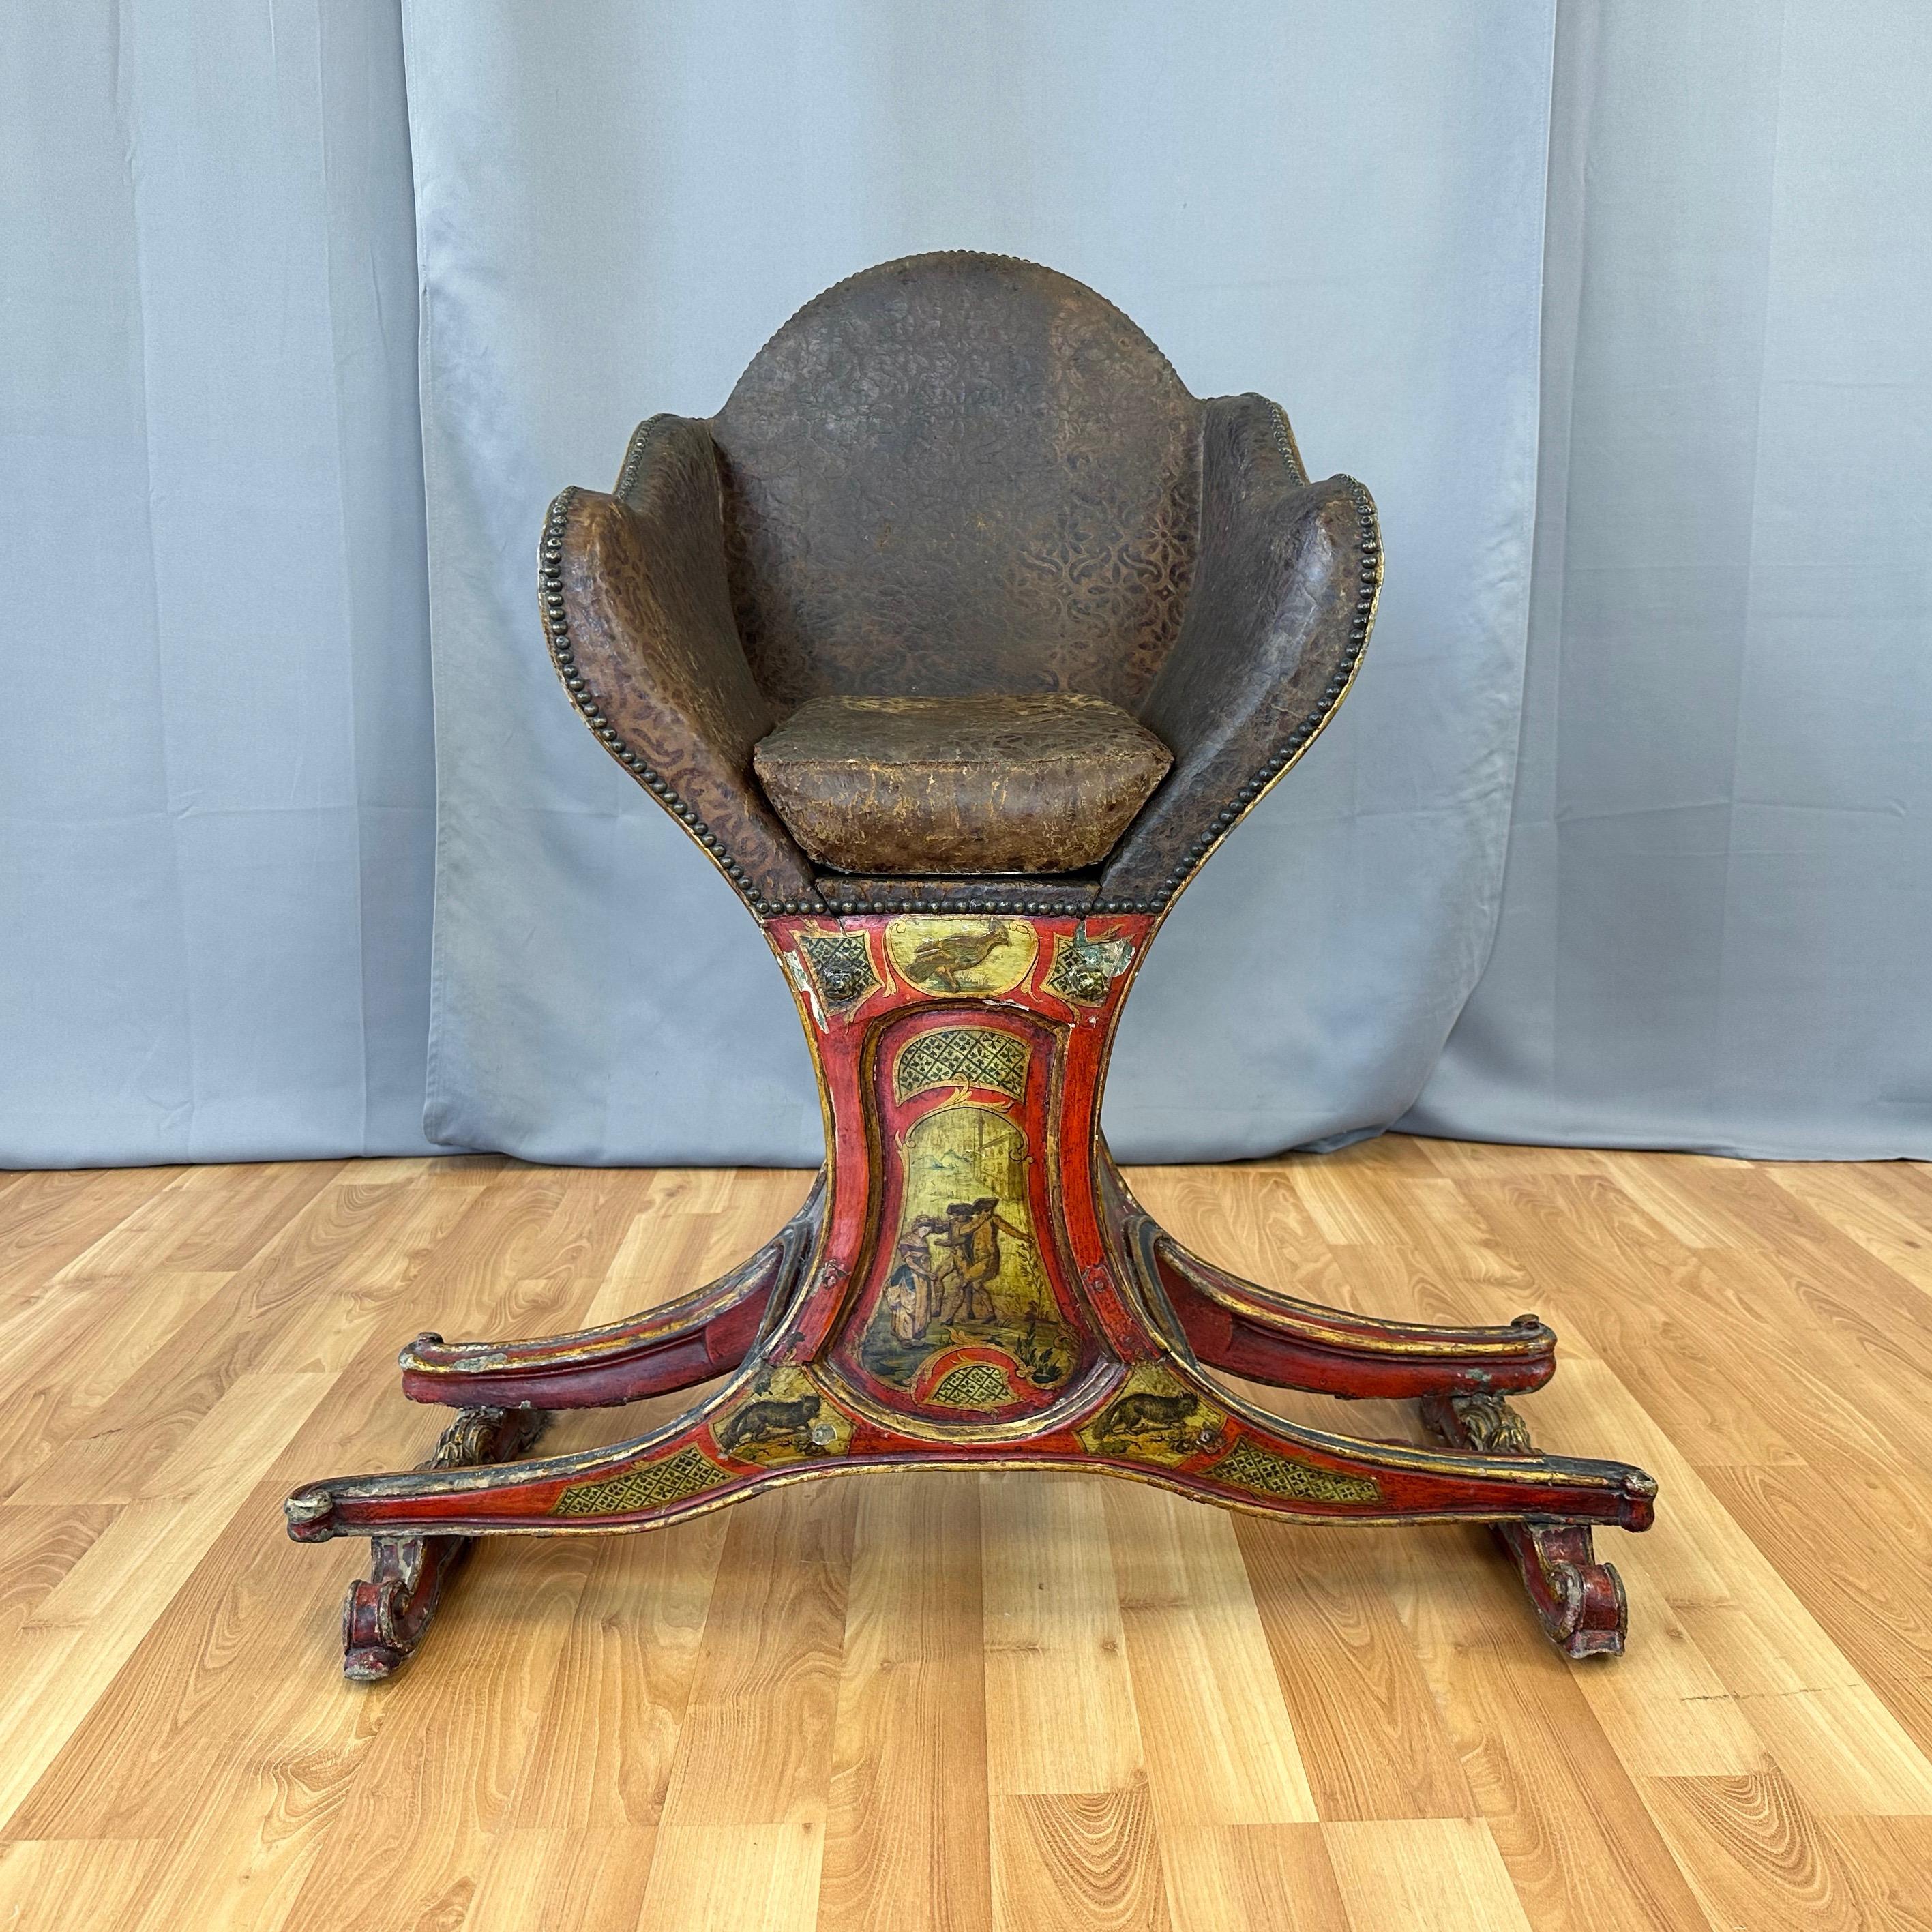 An absolutely stunning and rare circa 1820 museum-worthy Venetian gondola chair with illustrated panels, polychrome finish, parcel-gilt decorations, and original leather upholstery. Presented in its extraordinarily well-preserved and unaltered